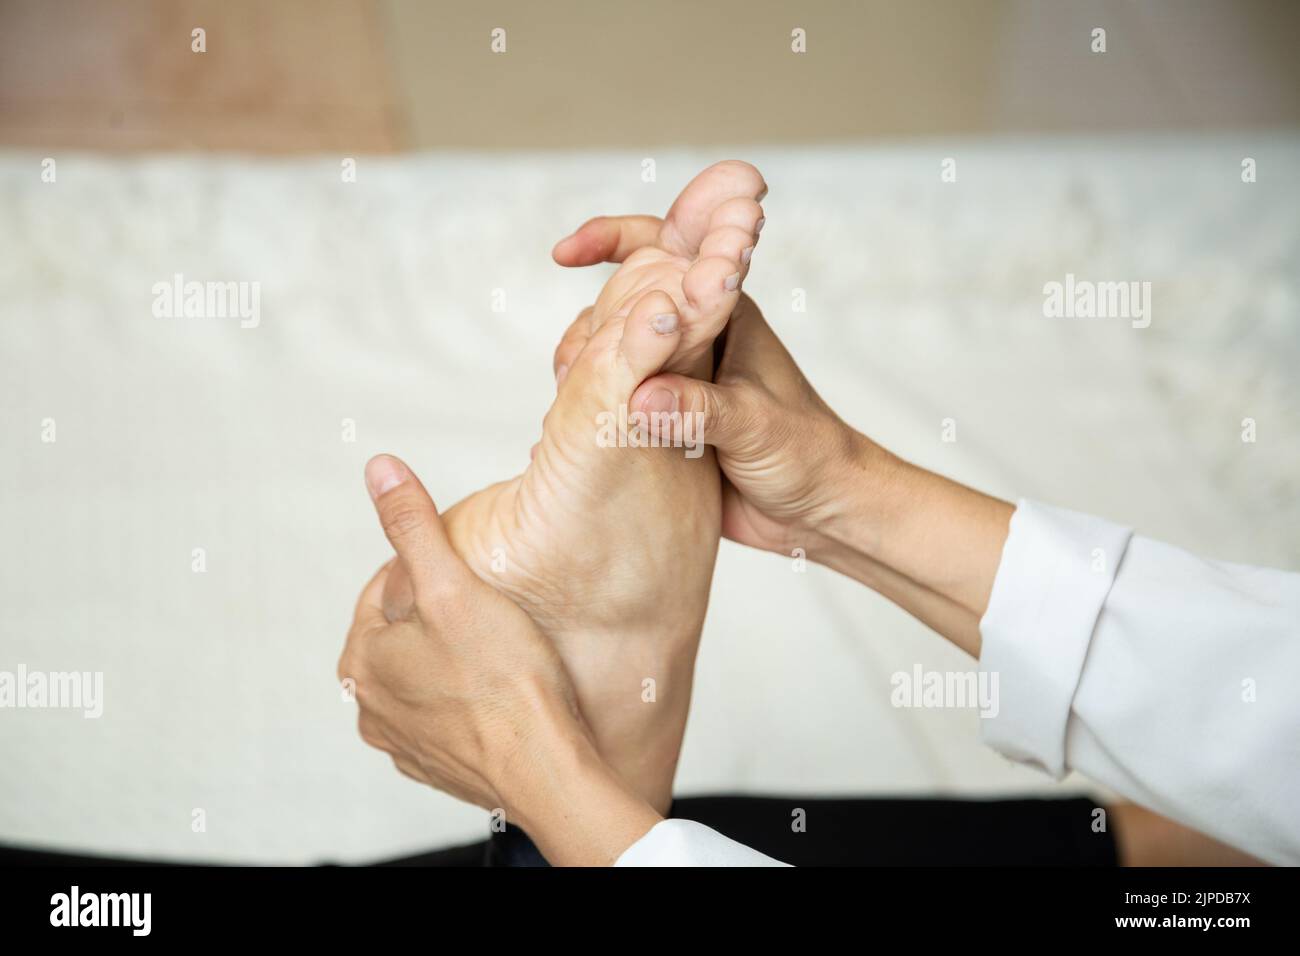 Goiânia, Goias, Brazil – July 18, 2022: Closeup of massage therapist hands applying therapeutic massage to a patient's foot. Stock Photo